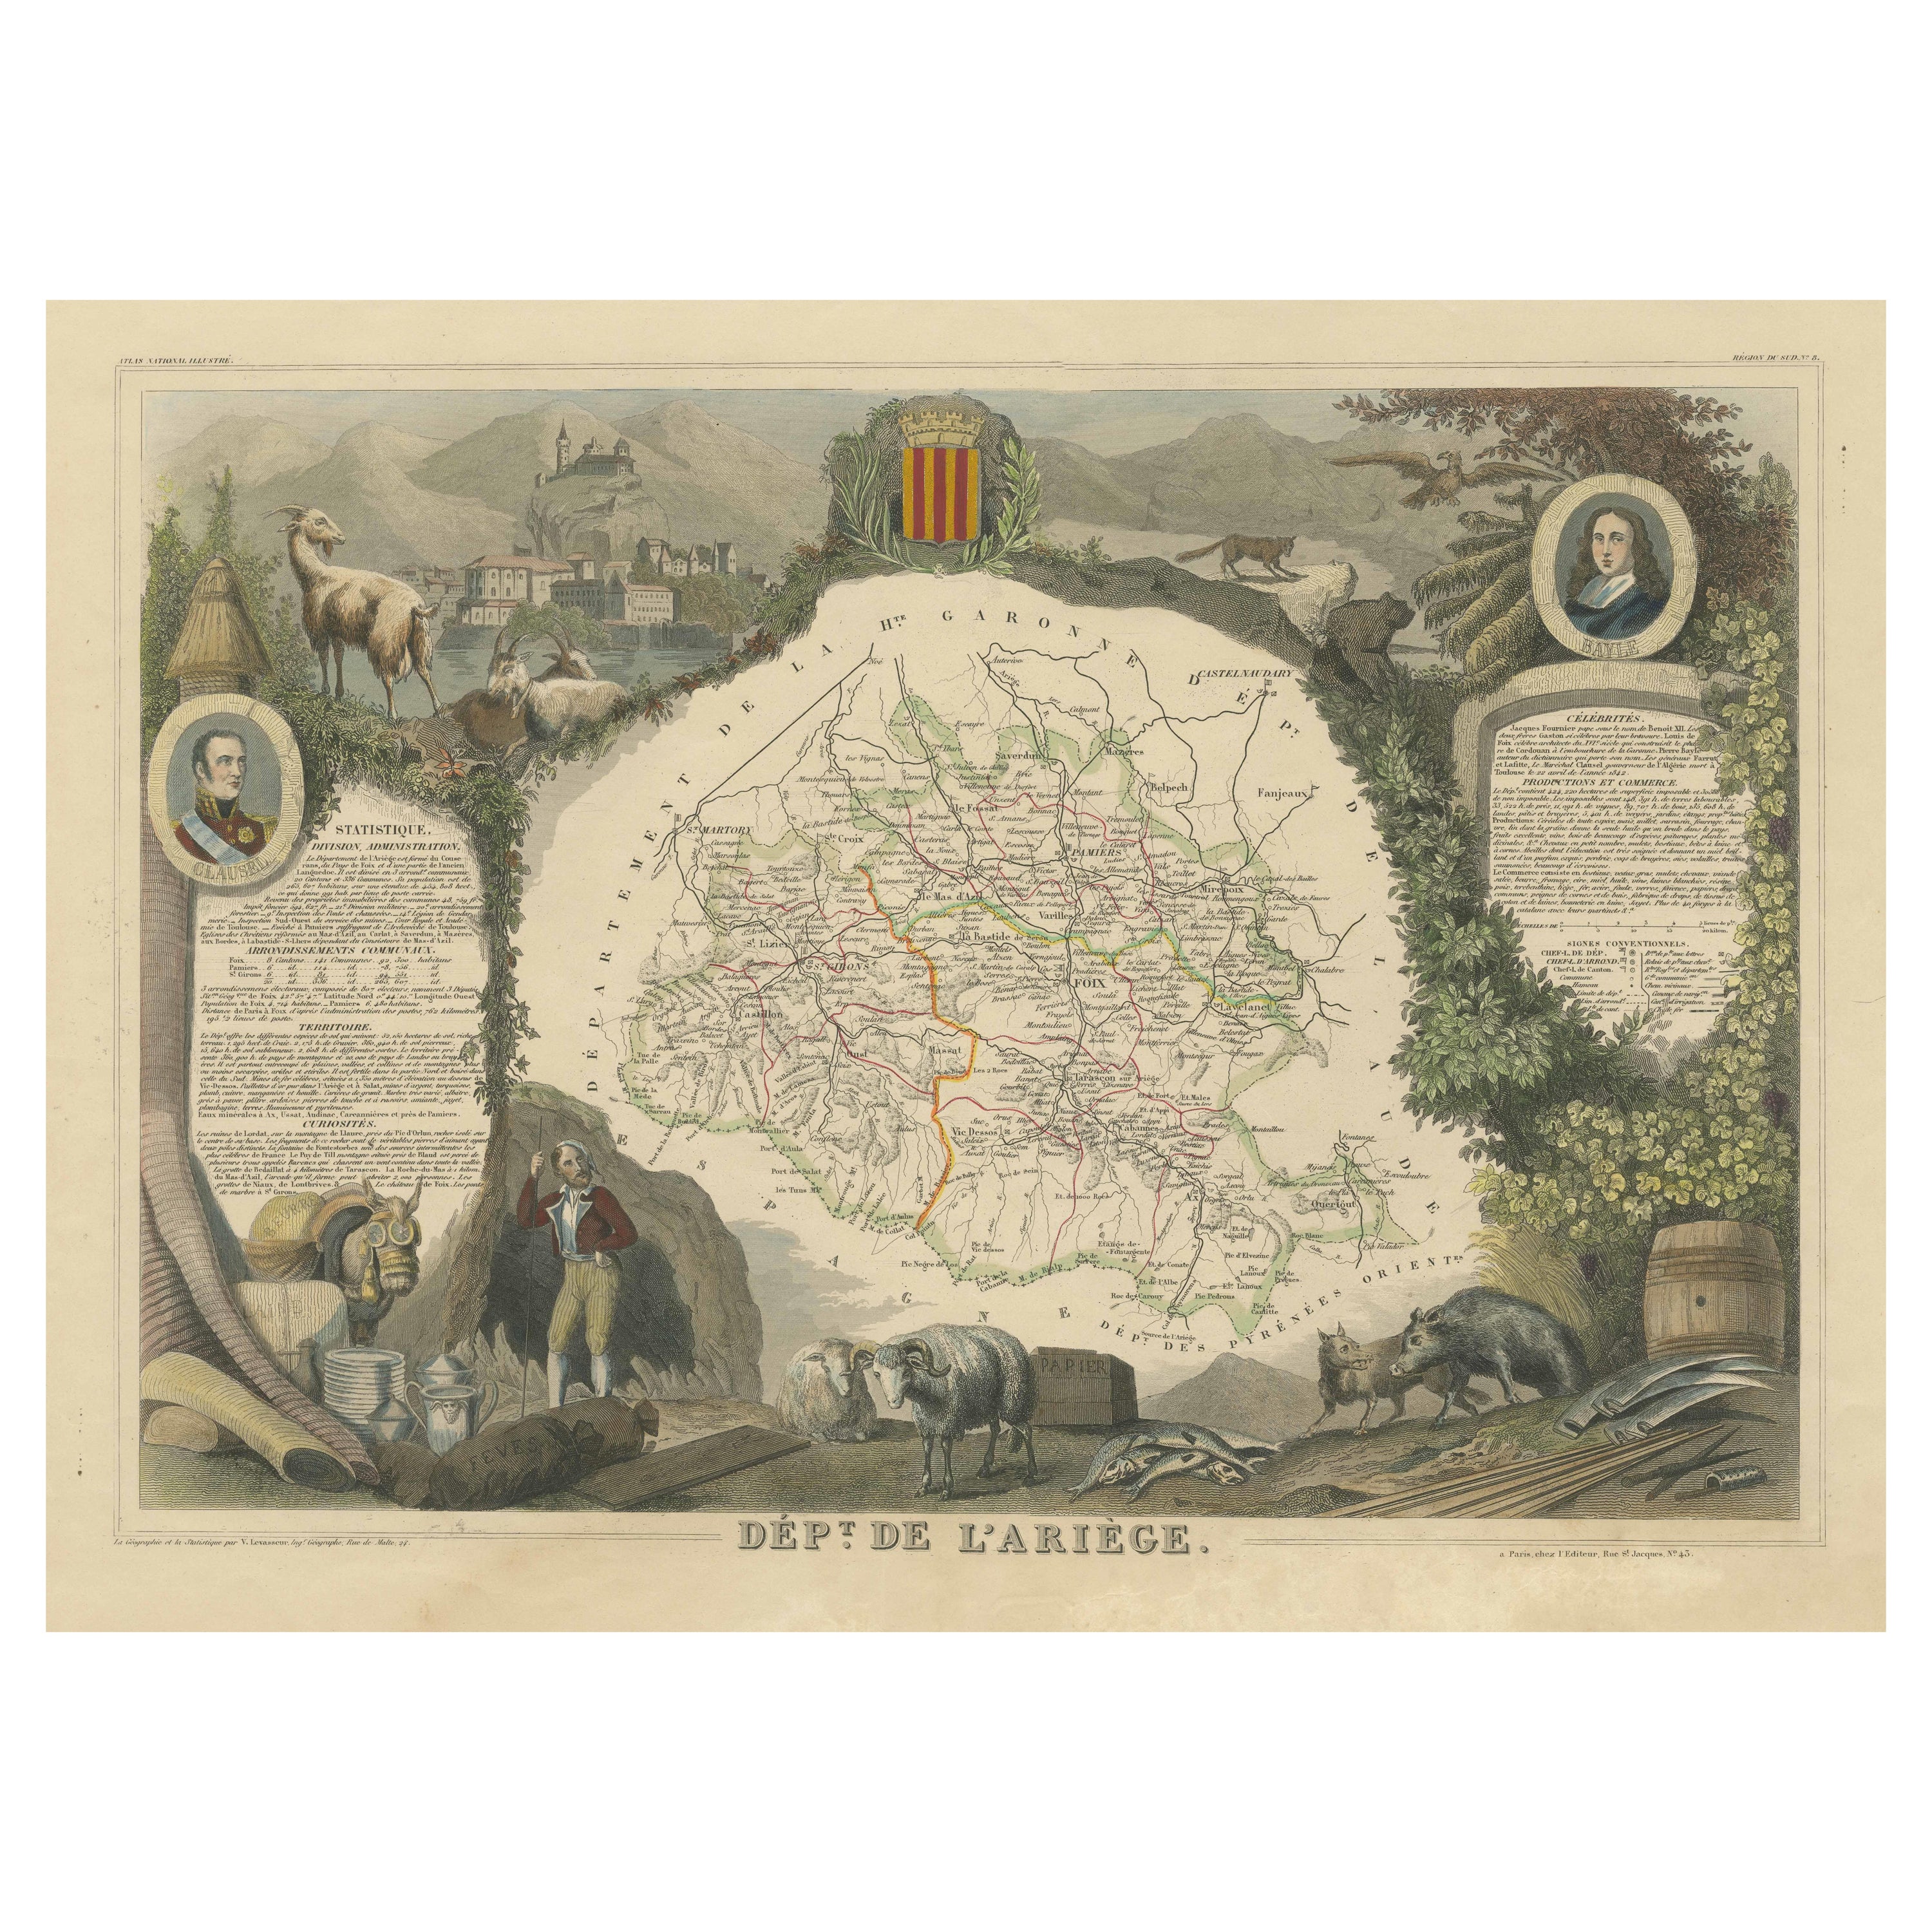 Old Map of the French department of Ariège, France For Sale